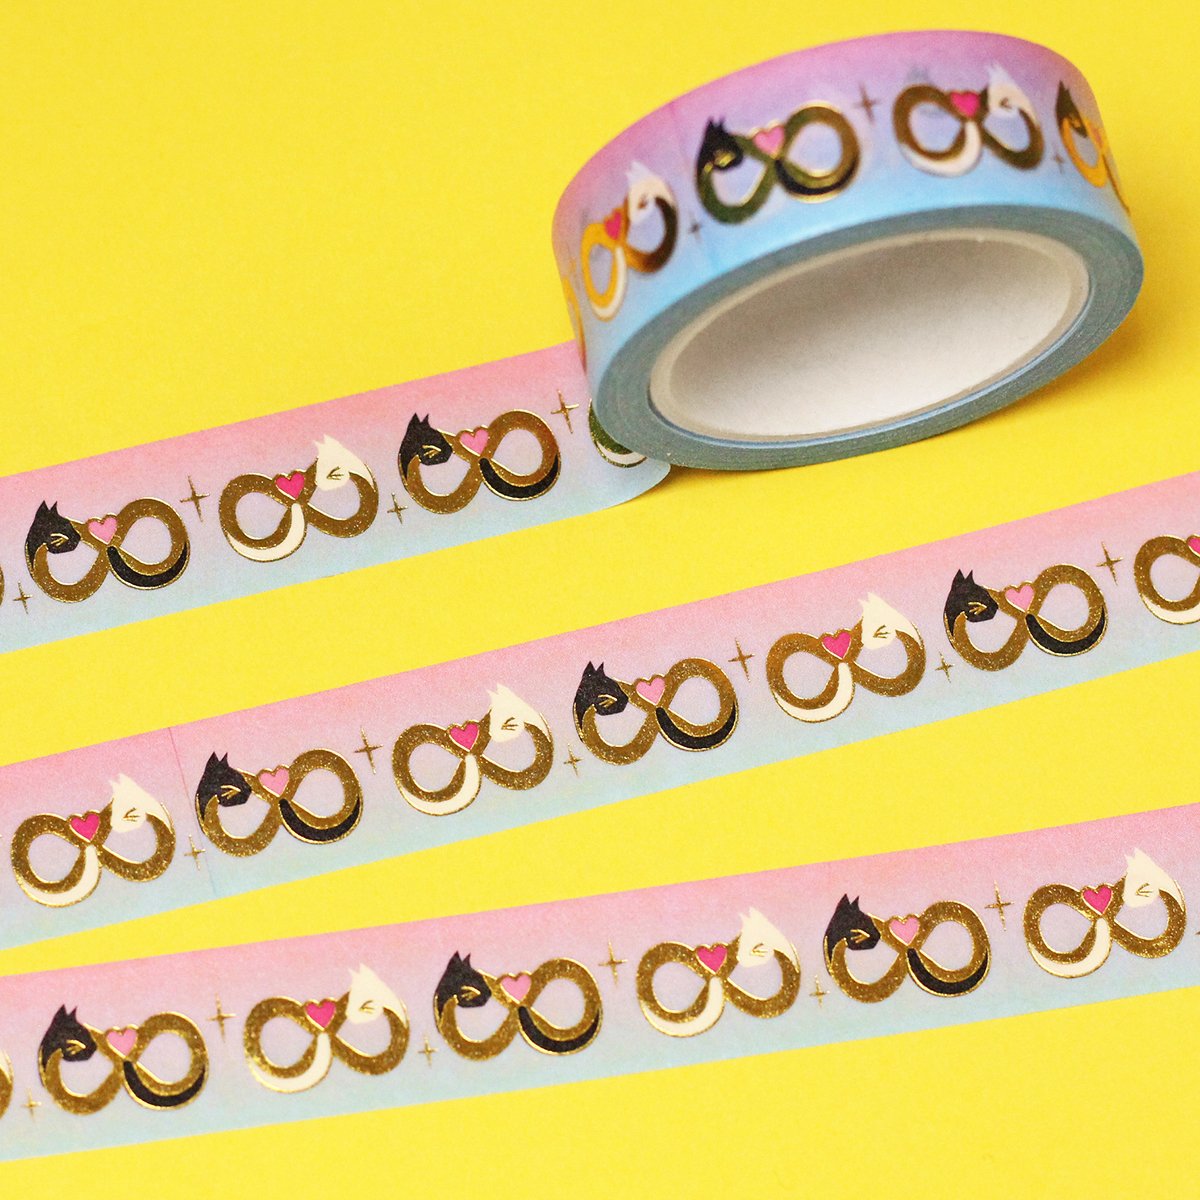 Image of Infinity symbol cats Washi Tape - gold foil - 15mm by 10m - Japanese masking tape